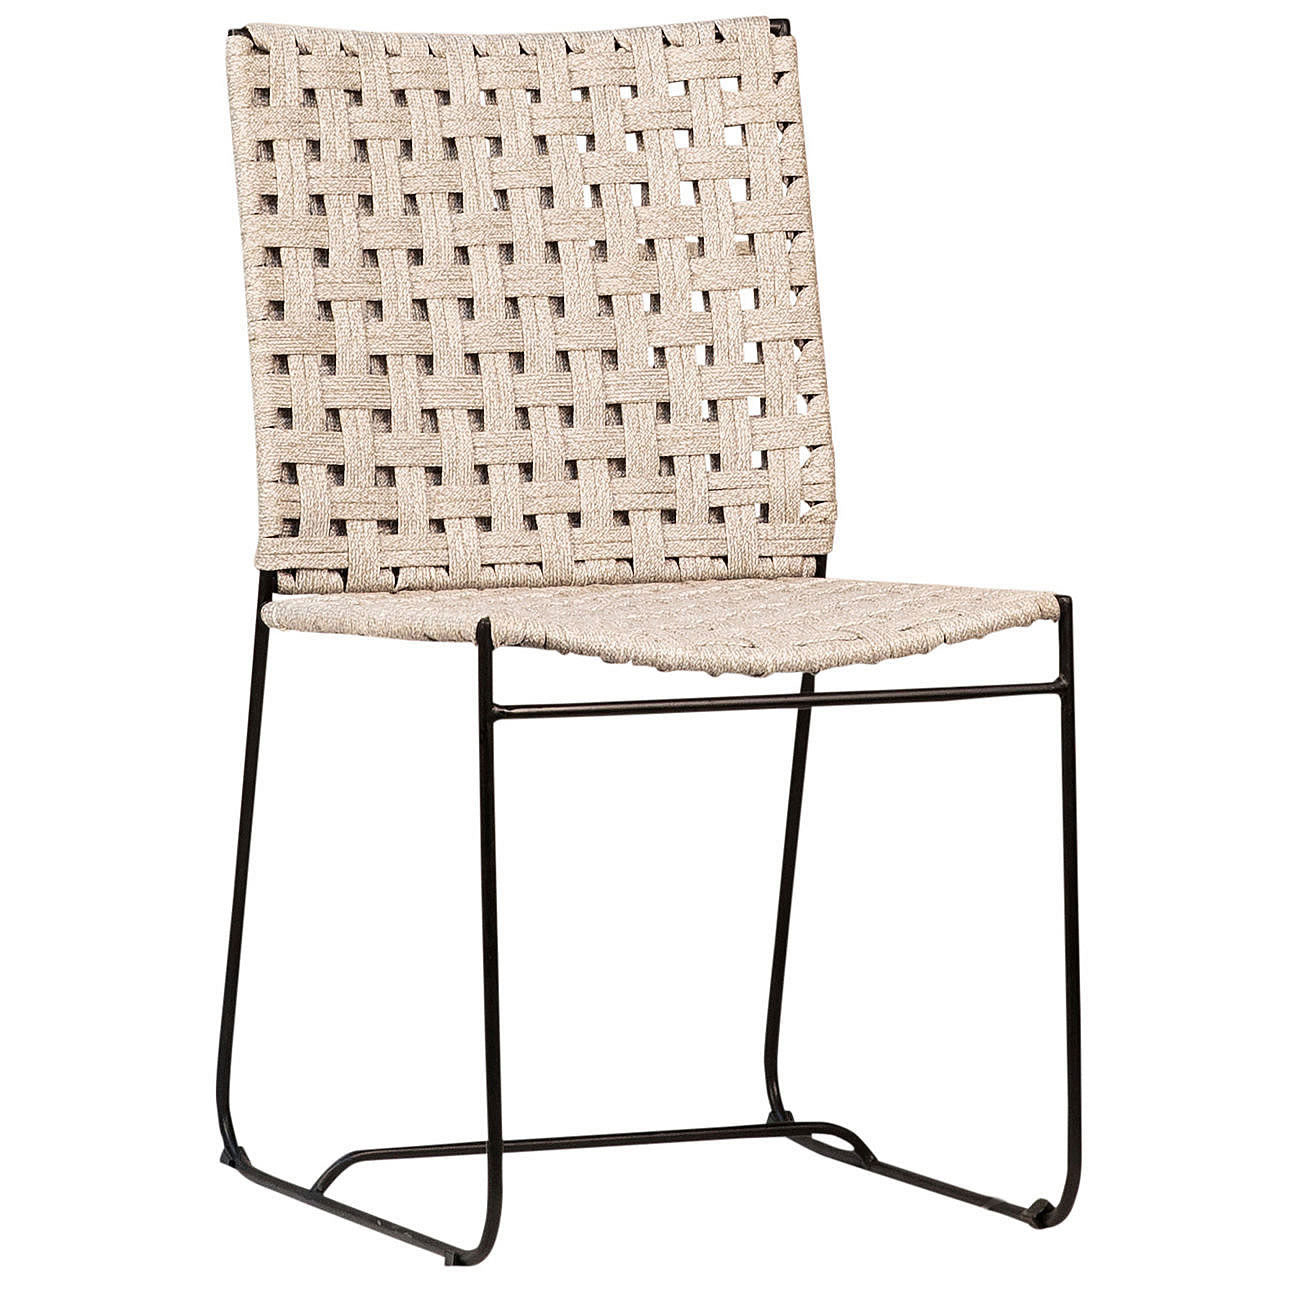 Ezra Outdoor Dining Chairs in Natural Rope & Black Powder Coated Legs PAIR Hollywood